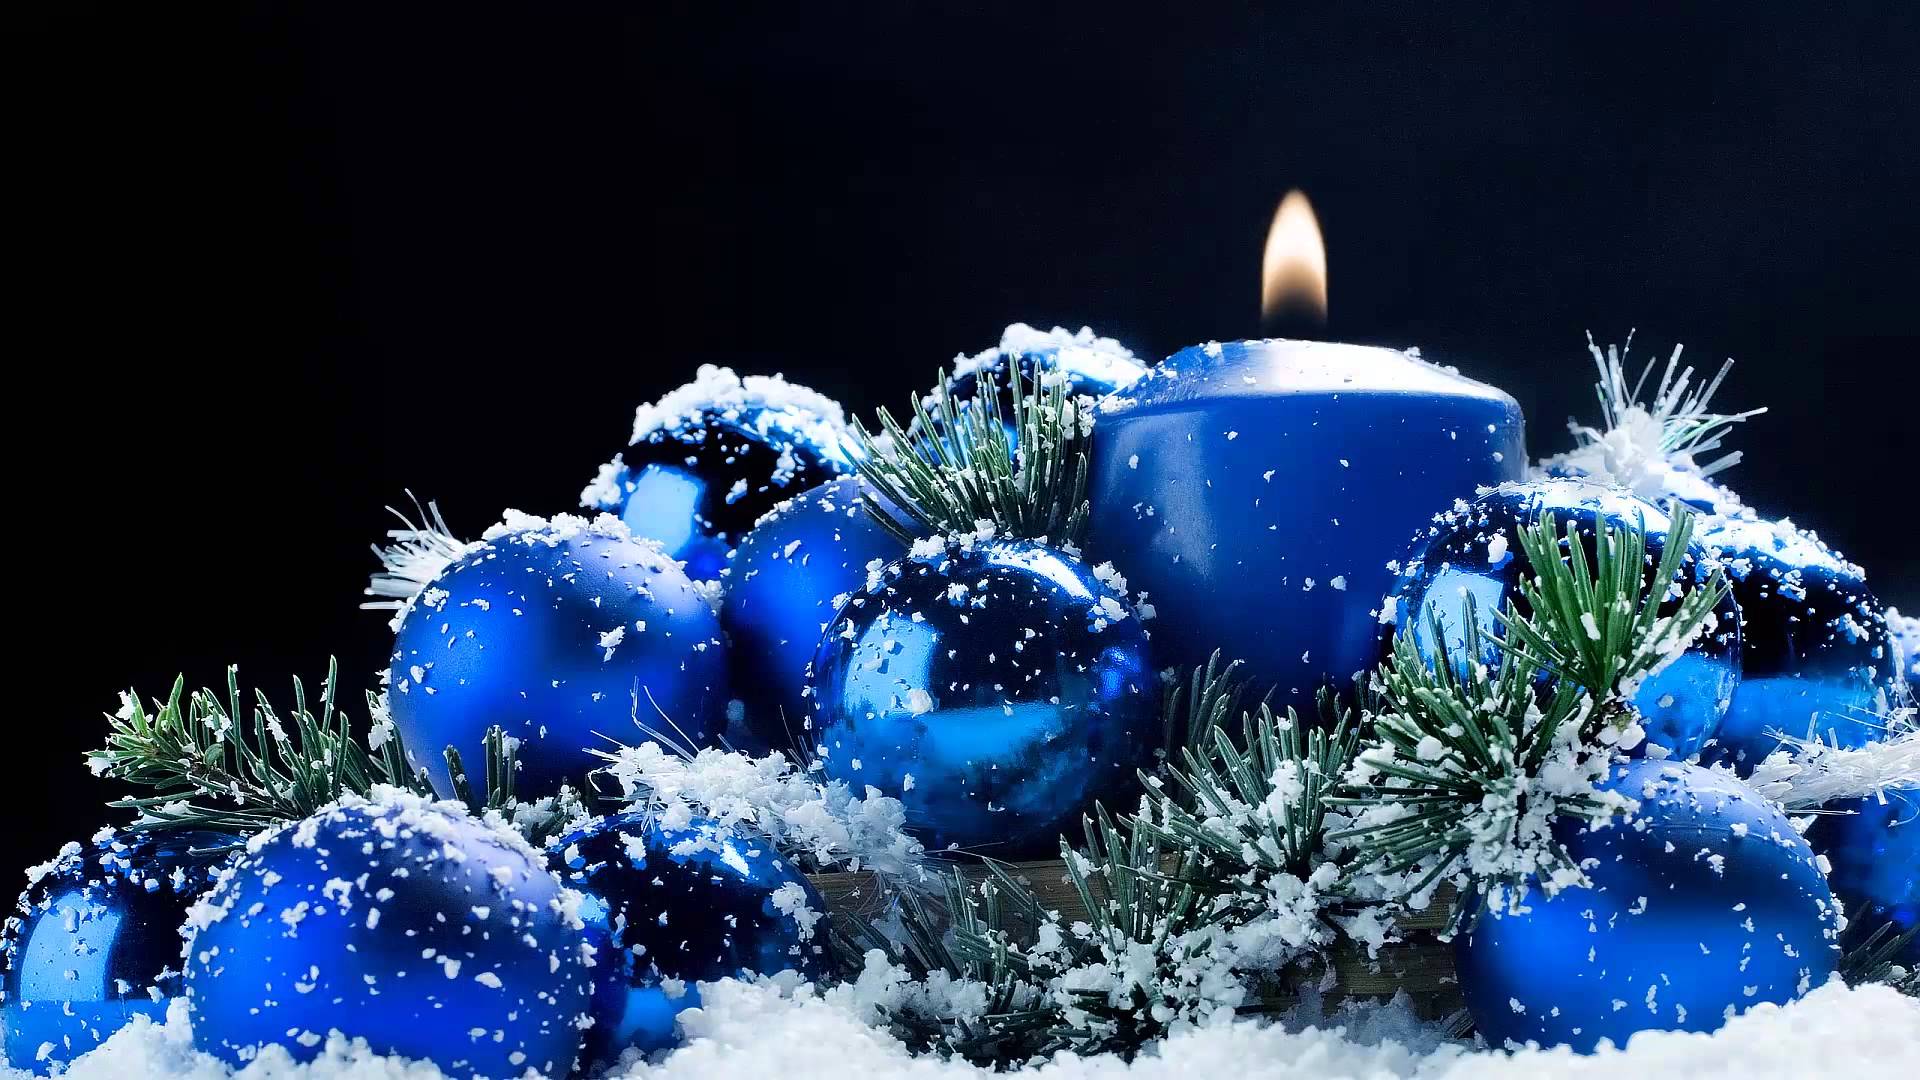 Blue Christmas Candle and relaxing